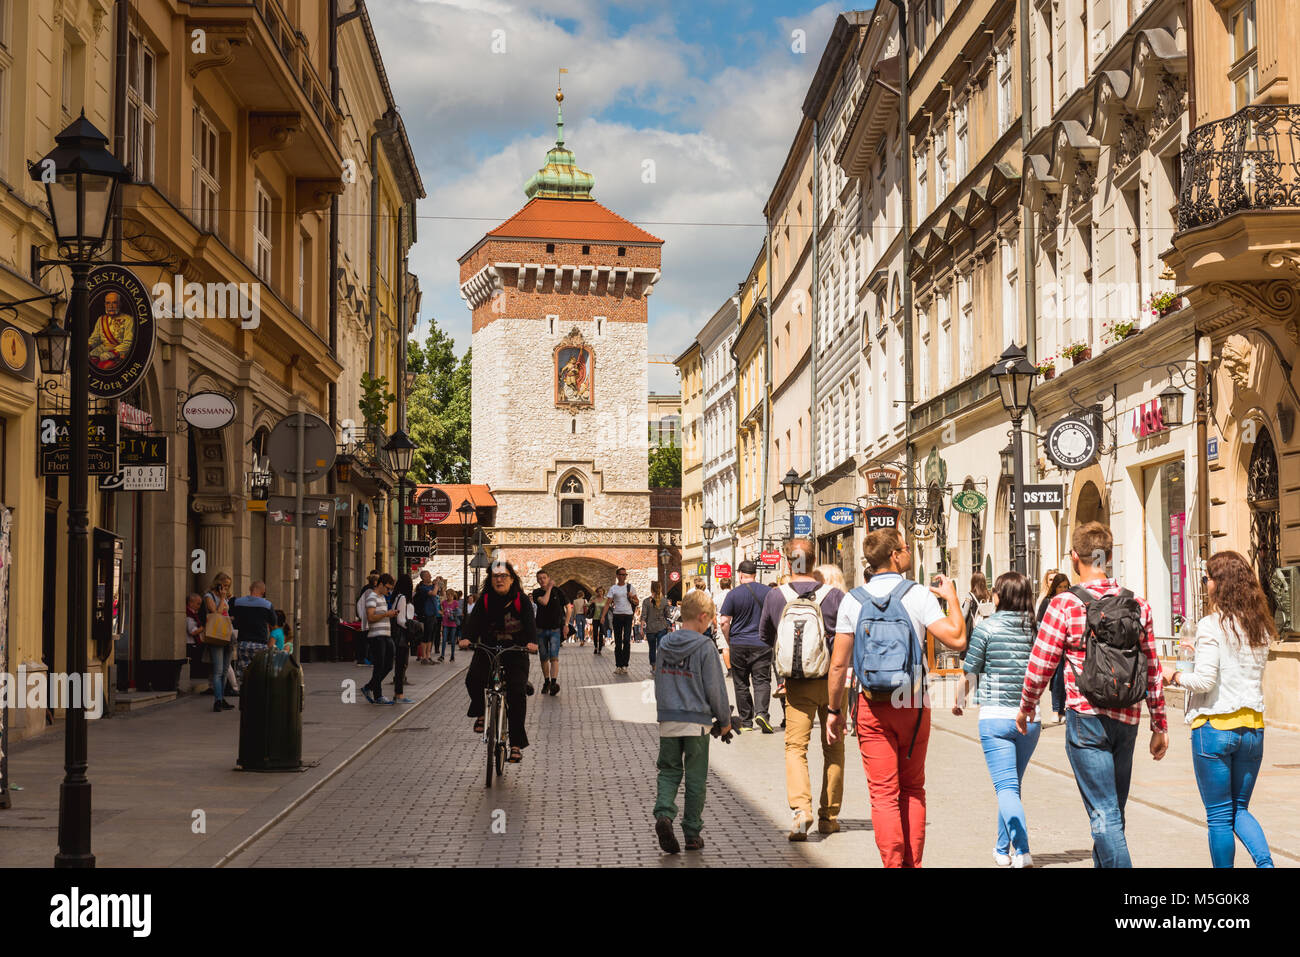 Krakow, Poland - August, 2017: city street with lots of people on the background. Stock Photo